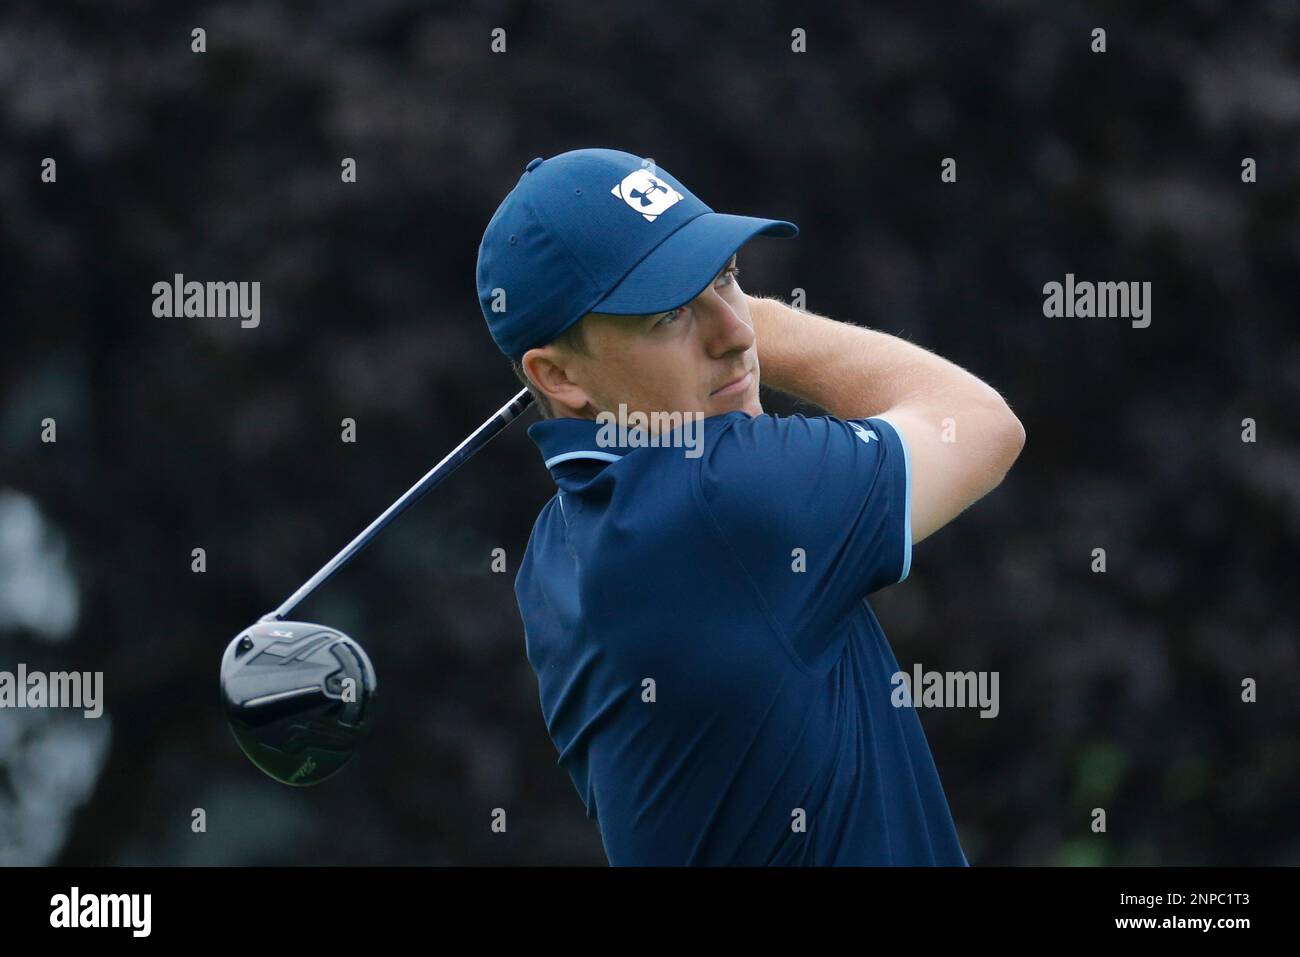 Jordan Spieth in actions during the second round of the Zozo Championship golf tournament Friday, Oct